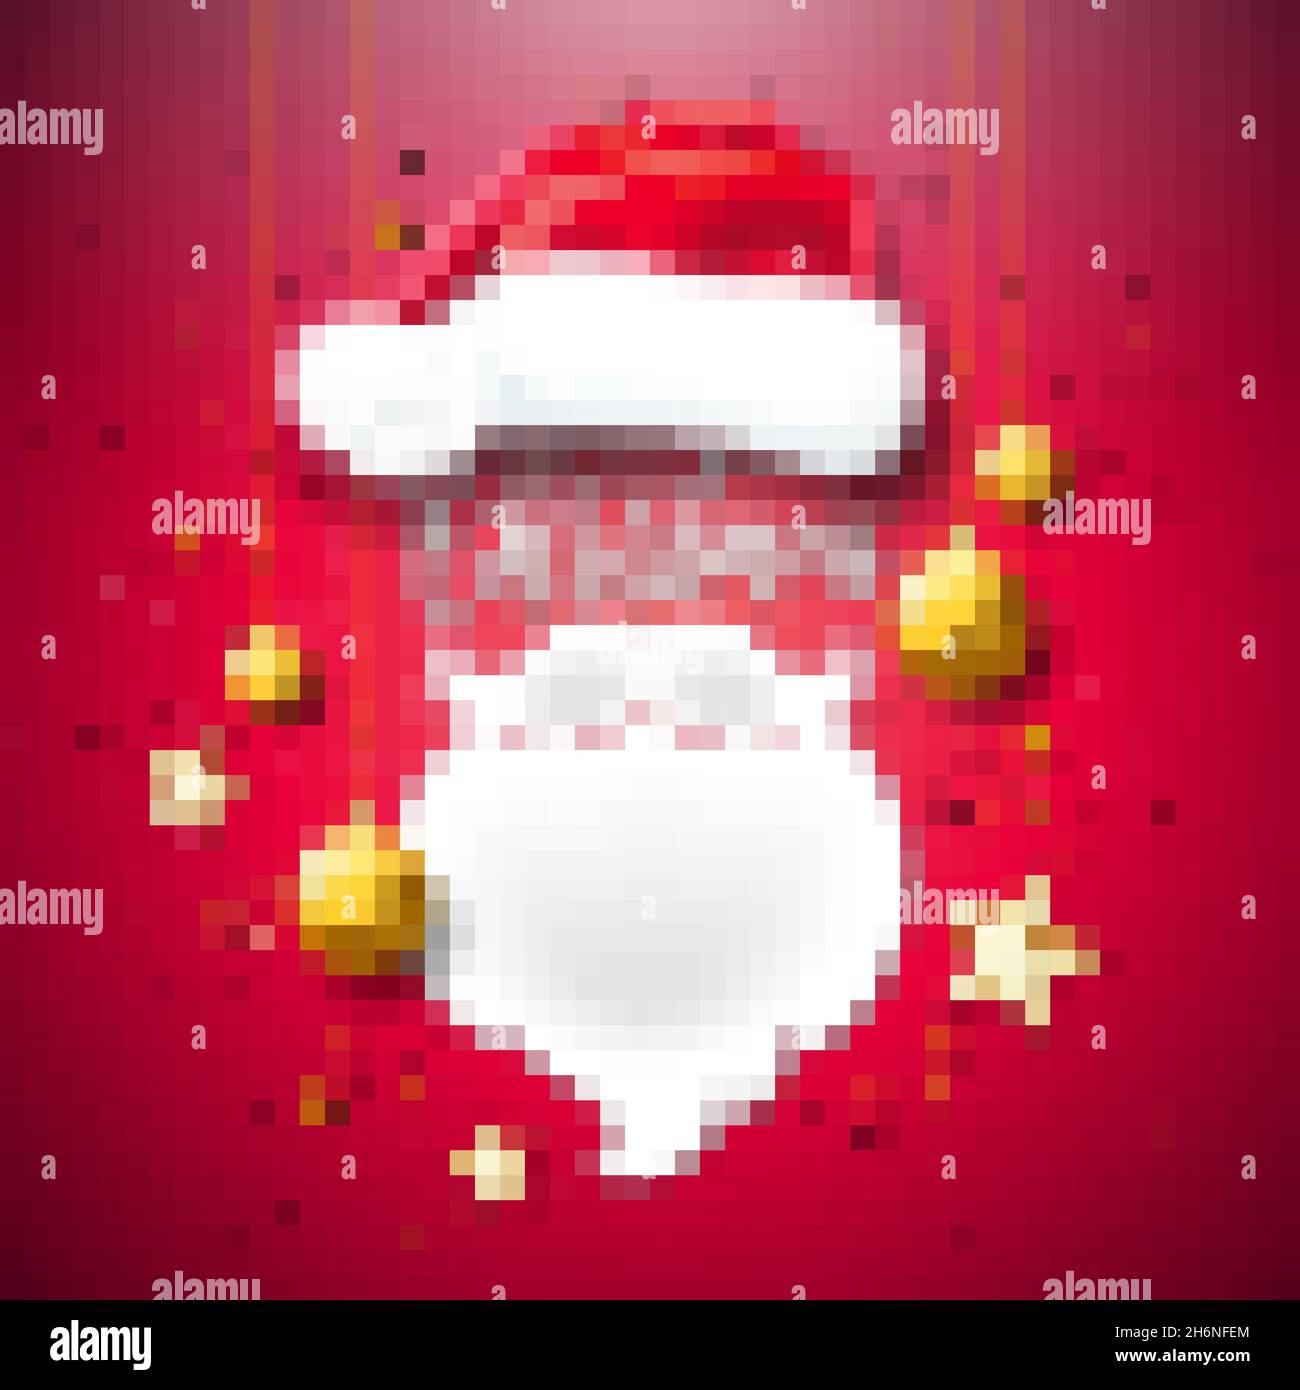 Merry Christmas and Happy New Year Illustration with Santa Hat, Beard, Gold Glass Ball, Star and Typography Elements on Red Background. Vector Holiday Stock Vector